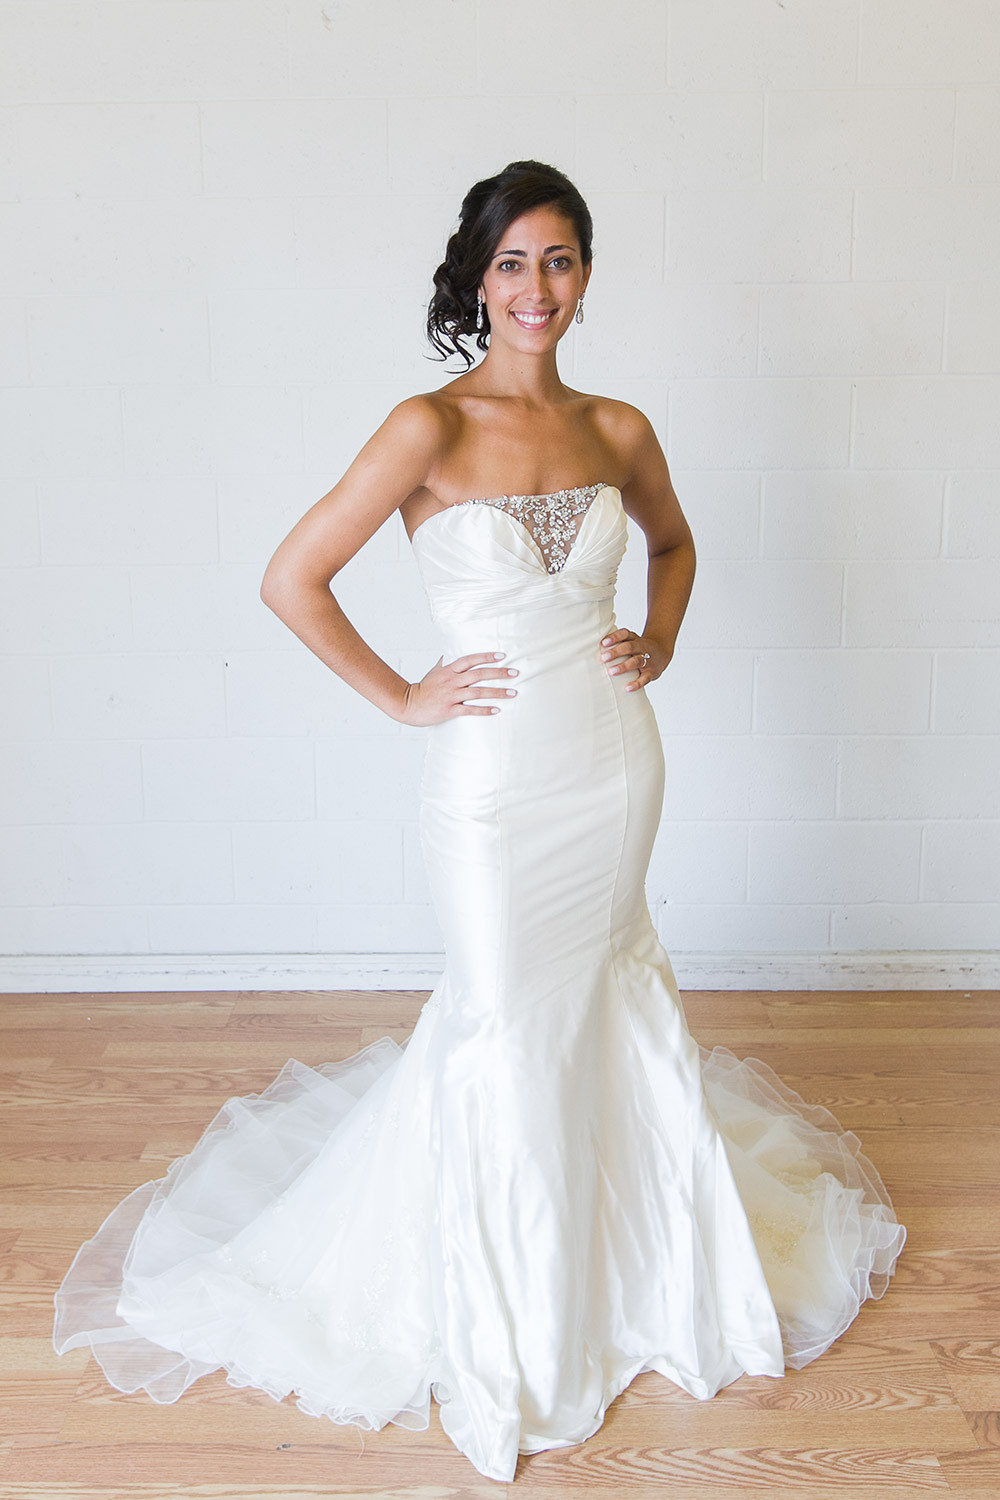 Rent Wedding Gowns
 The Pros and Cons of a Wedding Dress Rental